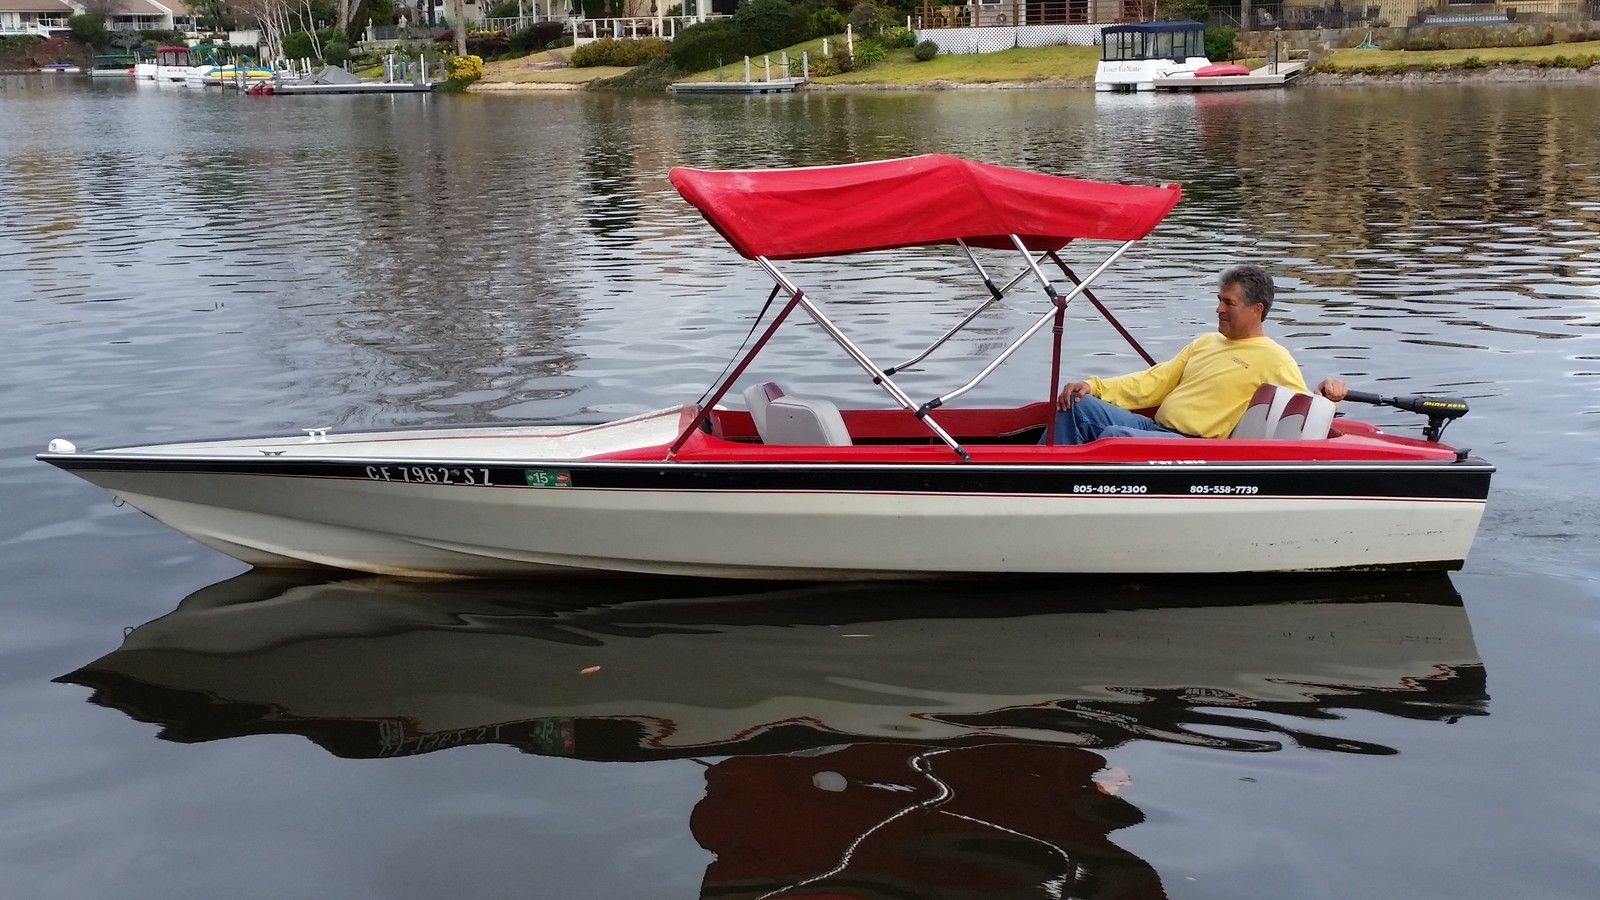 Witchcraft 16' ELECTRIC BOAT 2014 for sale for $900 